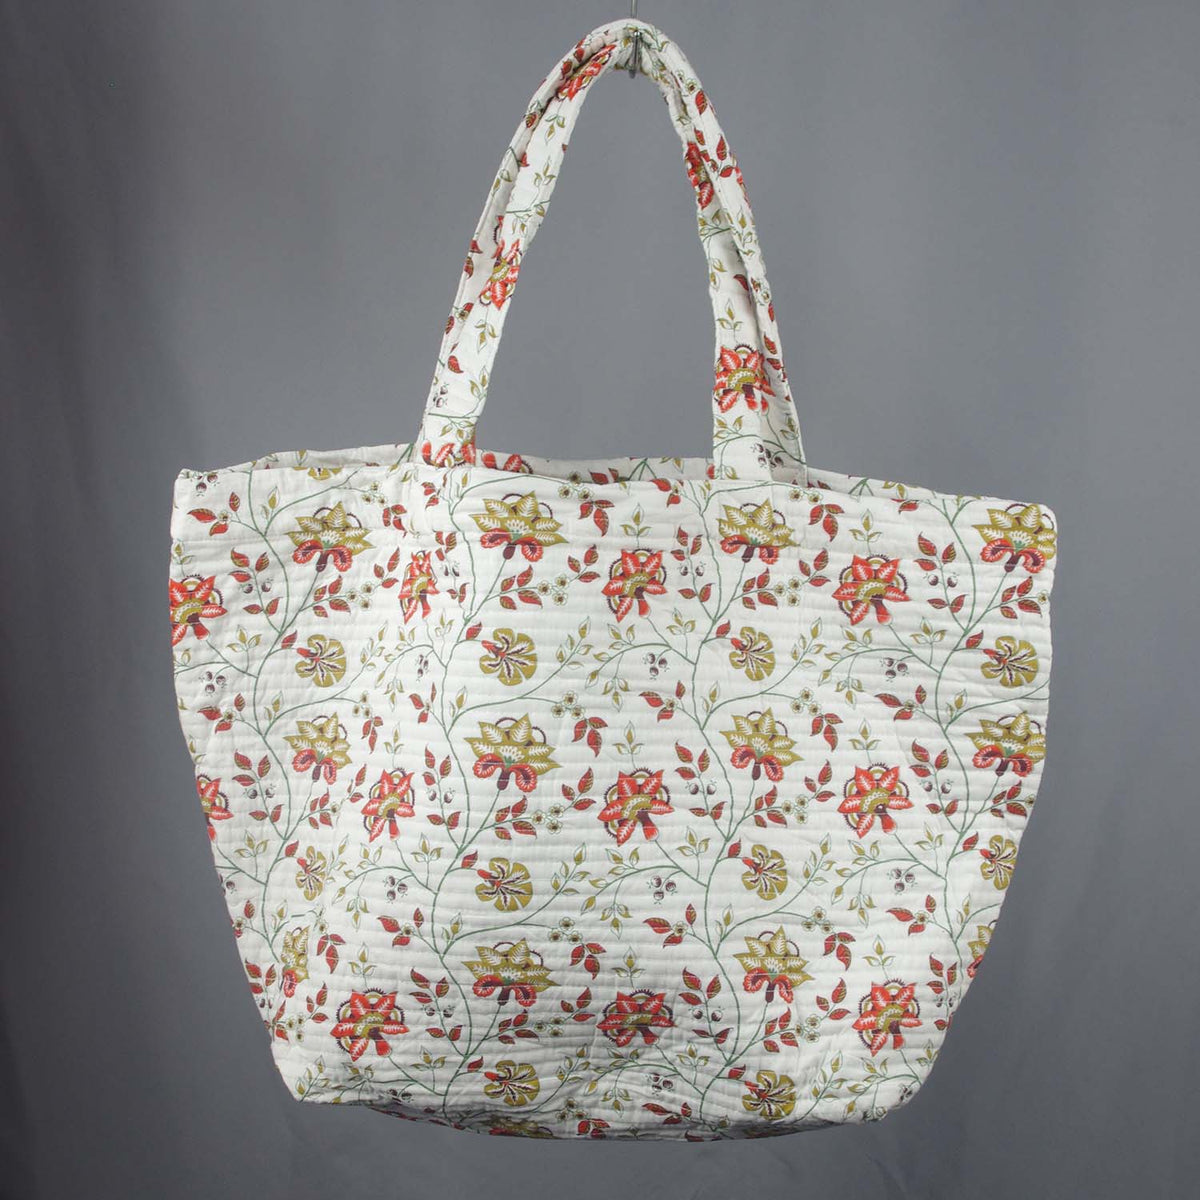 Cotton Quilted Large Shoppping / Beach Bag - White Red and Sand Brown Floral